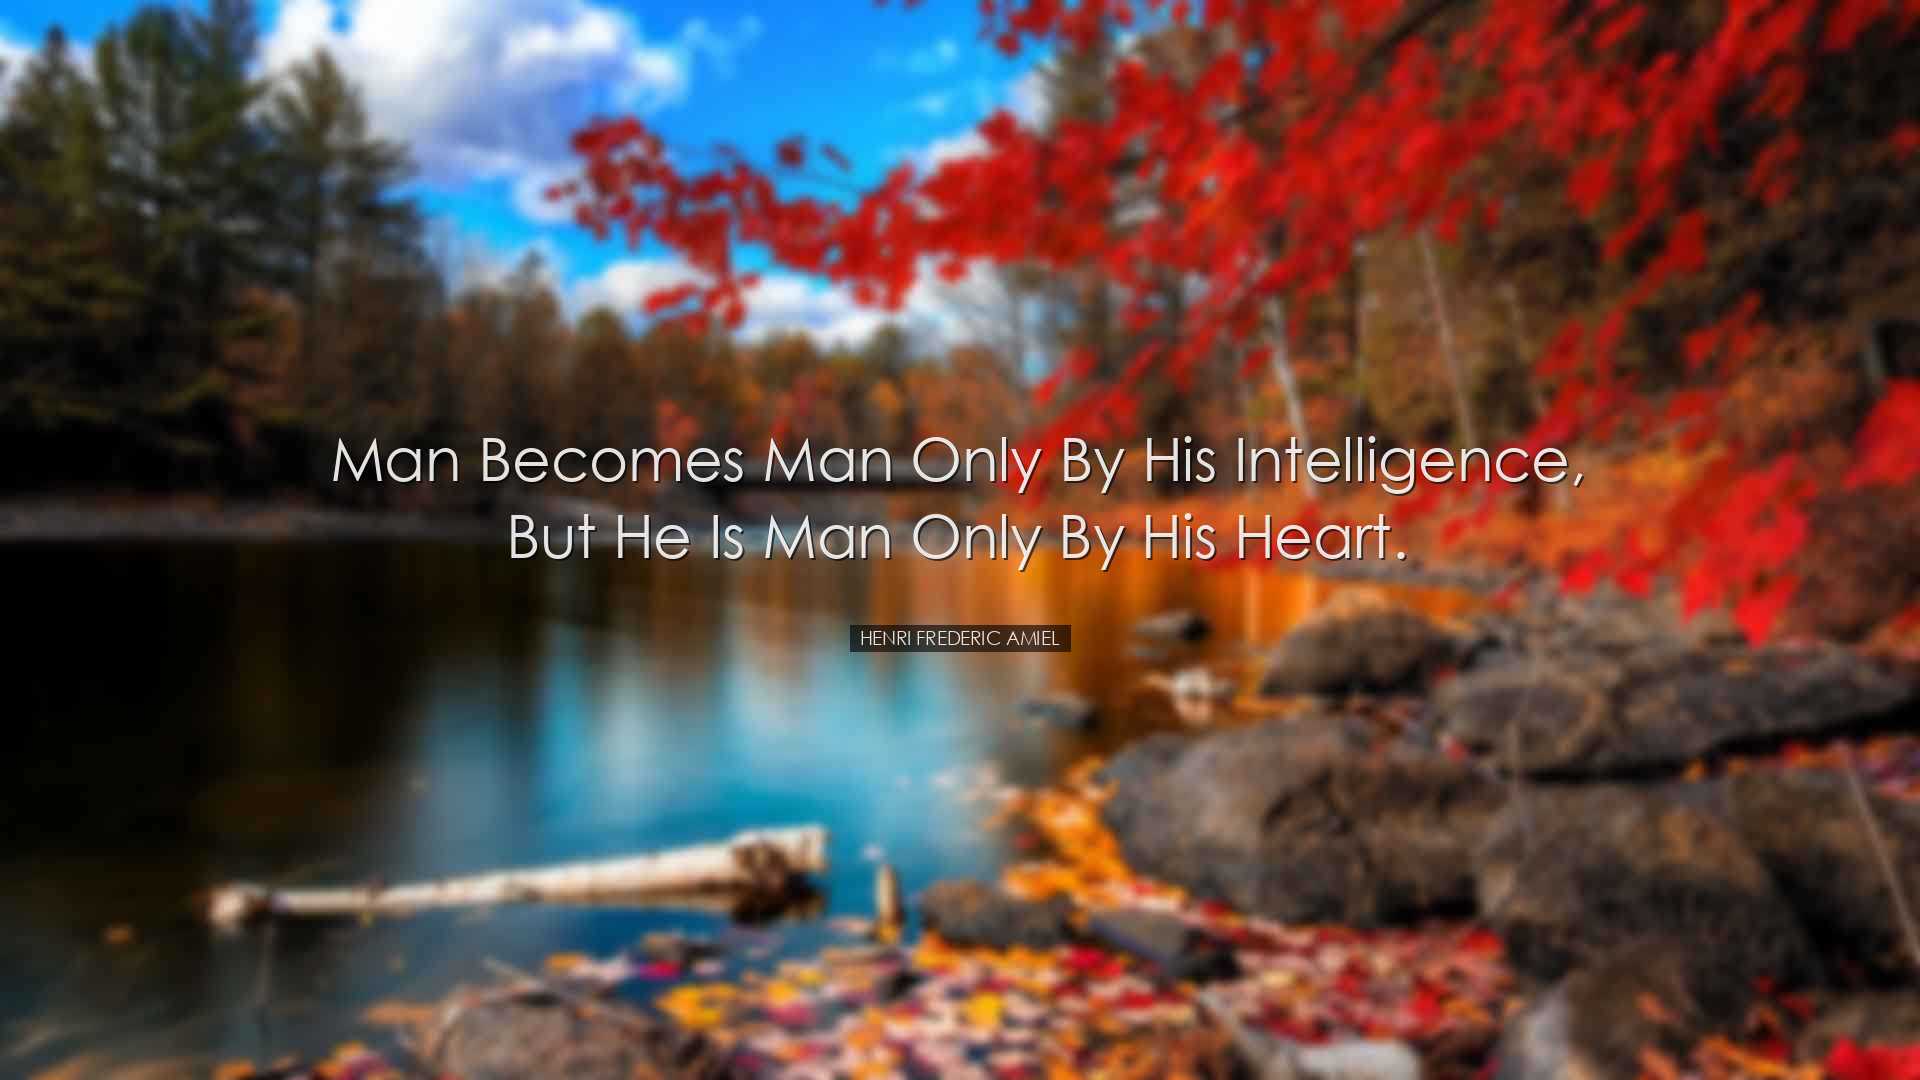 Man becomes man only by his intelligence, but he is man only by hi